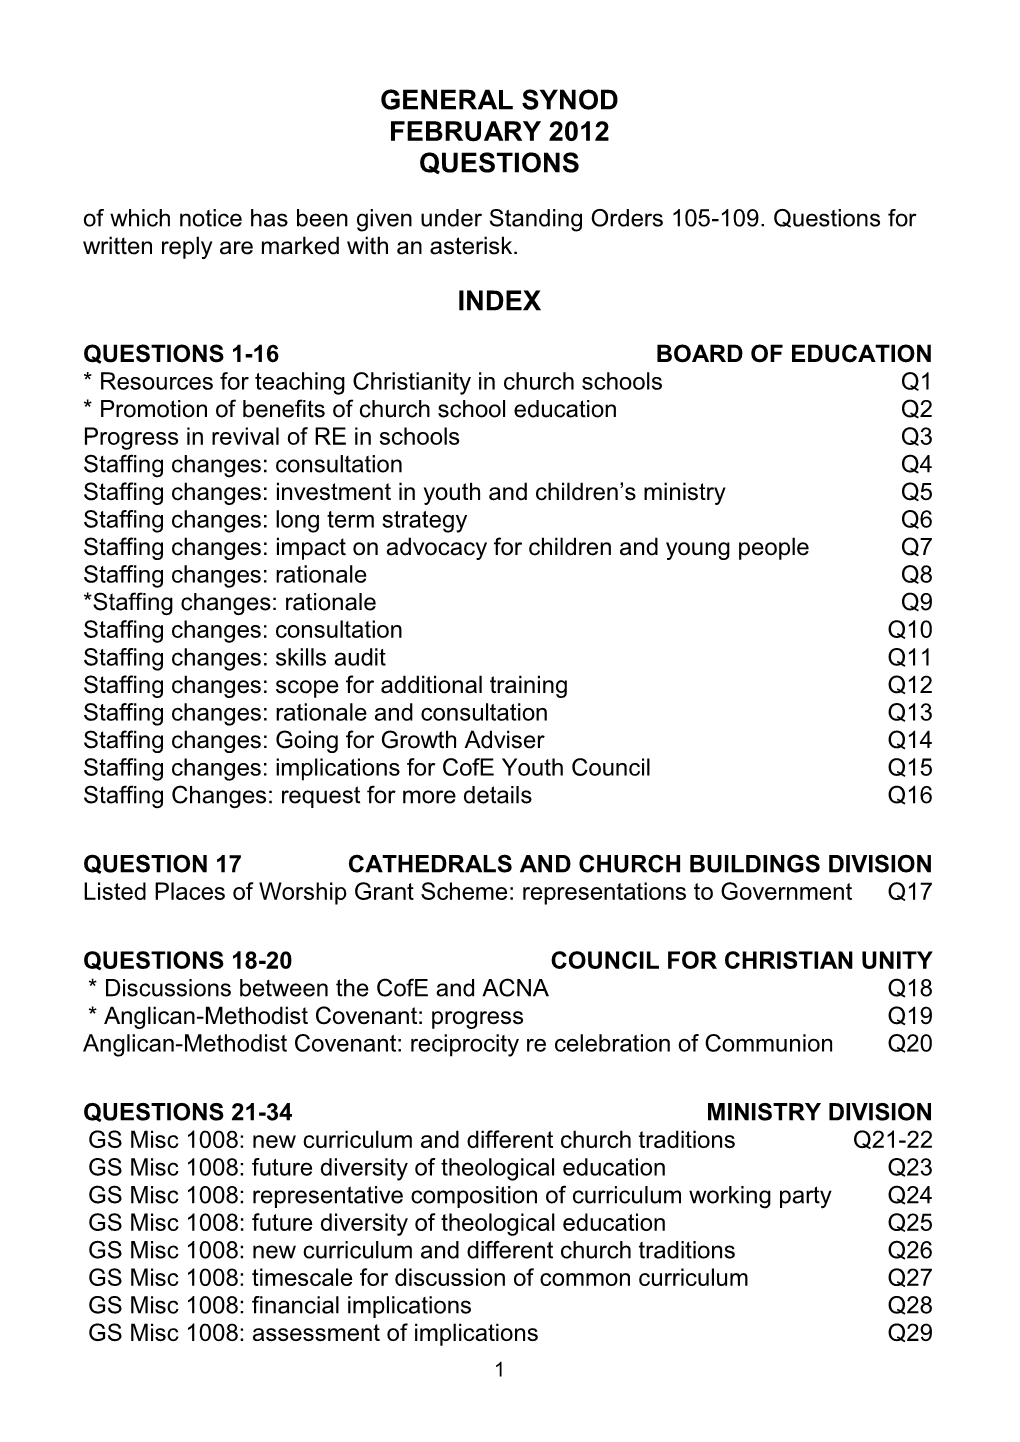 GENERAL SYNOD FEBRUARY 2012 QUESTIONS of Which Notice Has Been Given Under Standing Orders 105-109